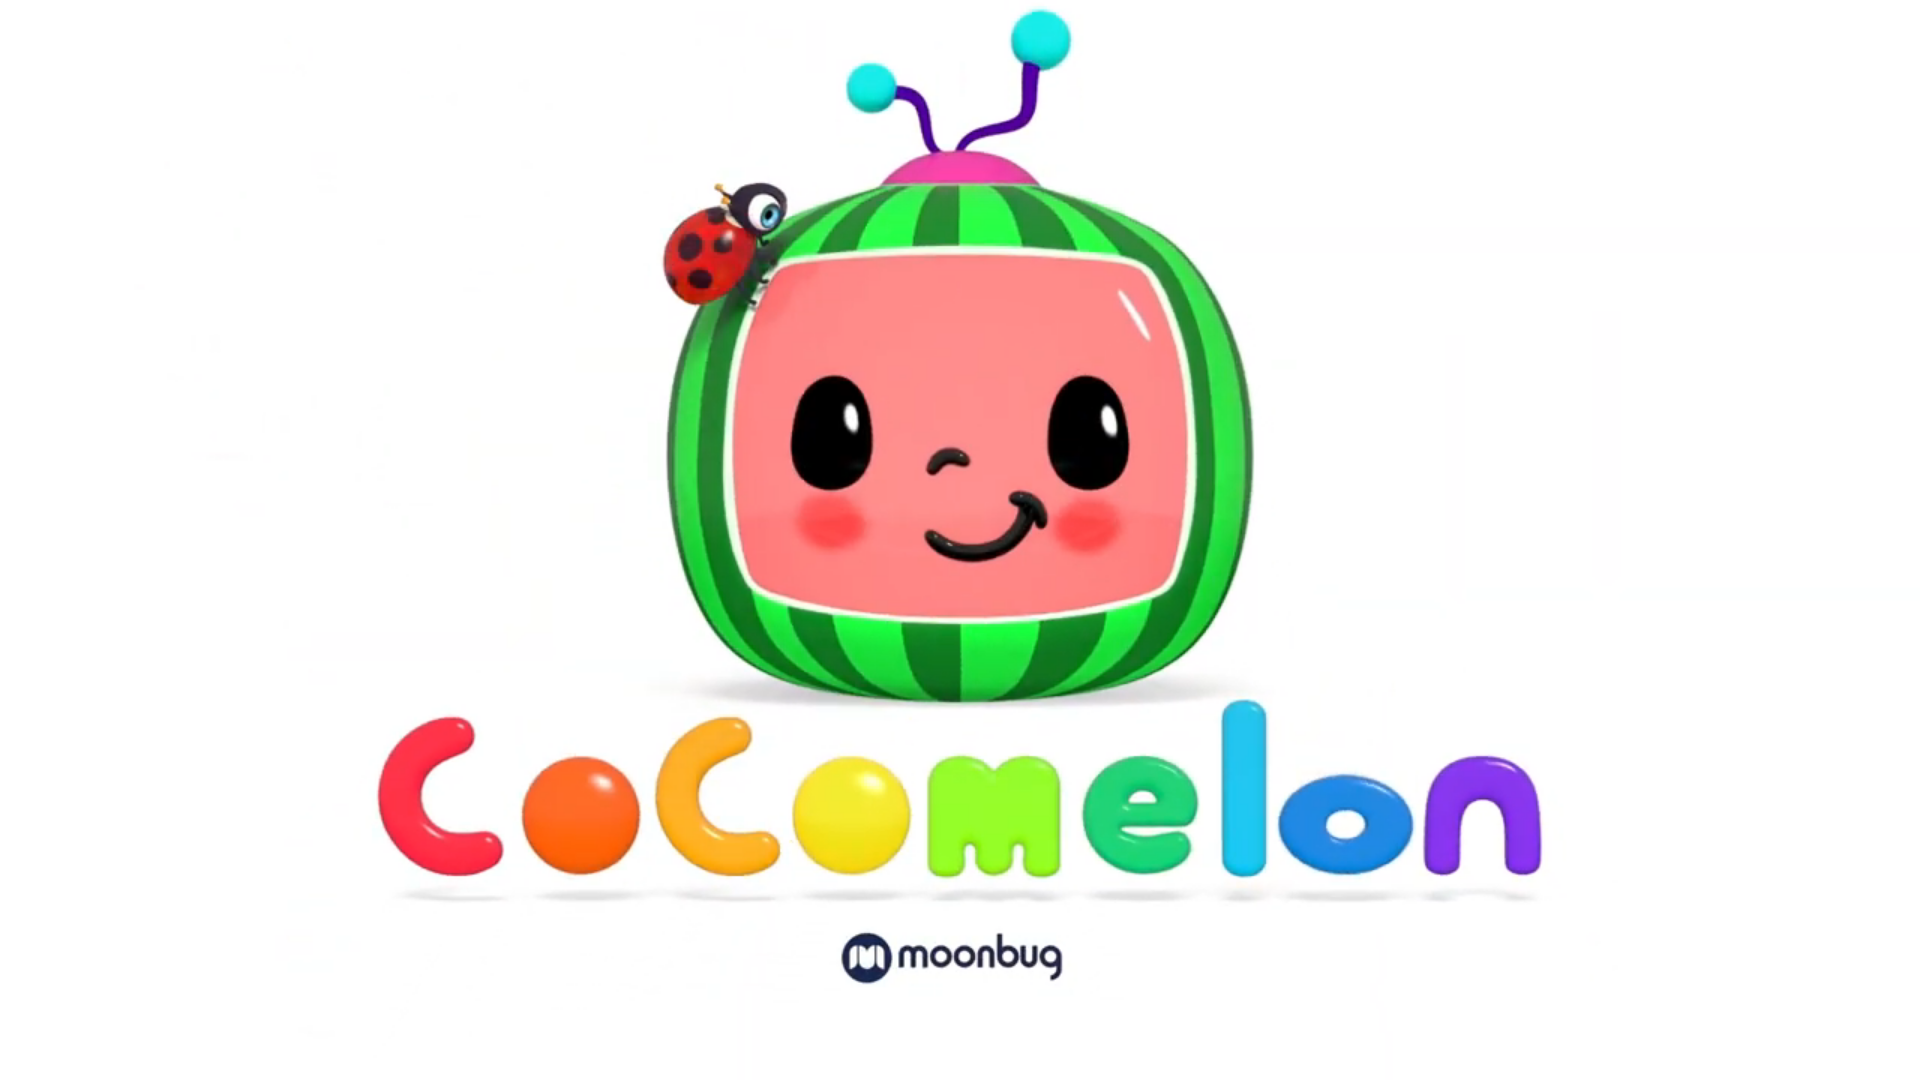 Soccer Song + More Nursery Rhymes & Kids Songs - CoComelon 